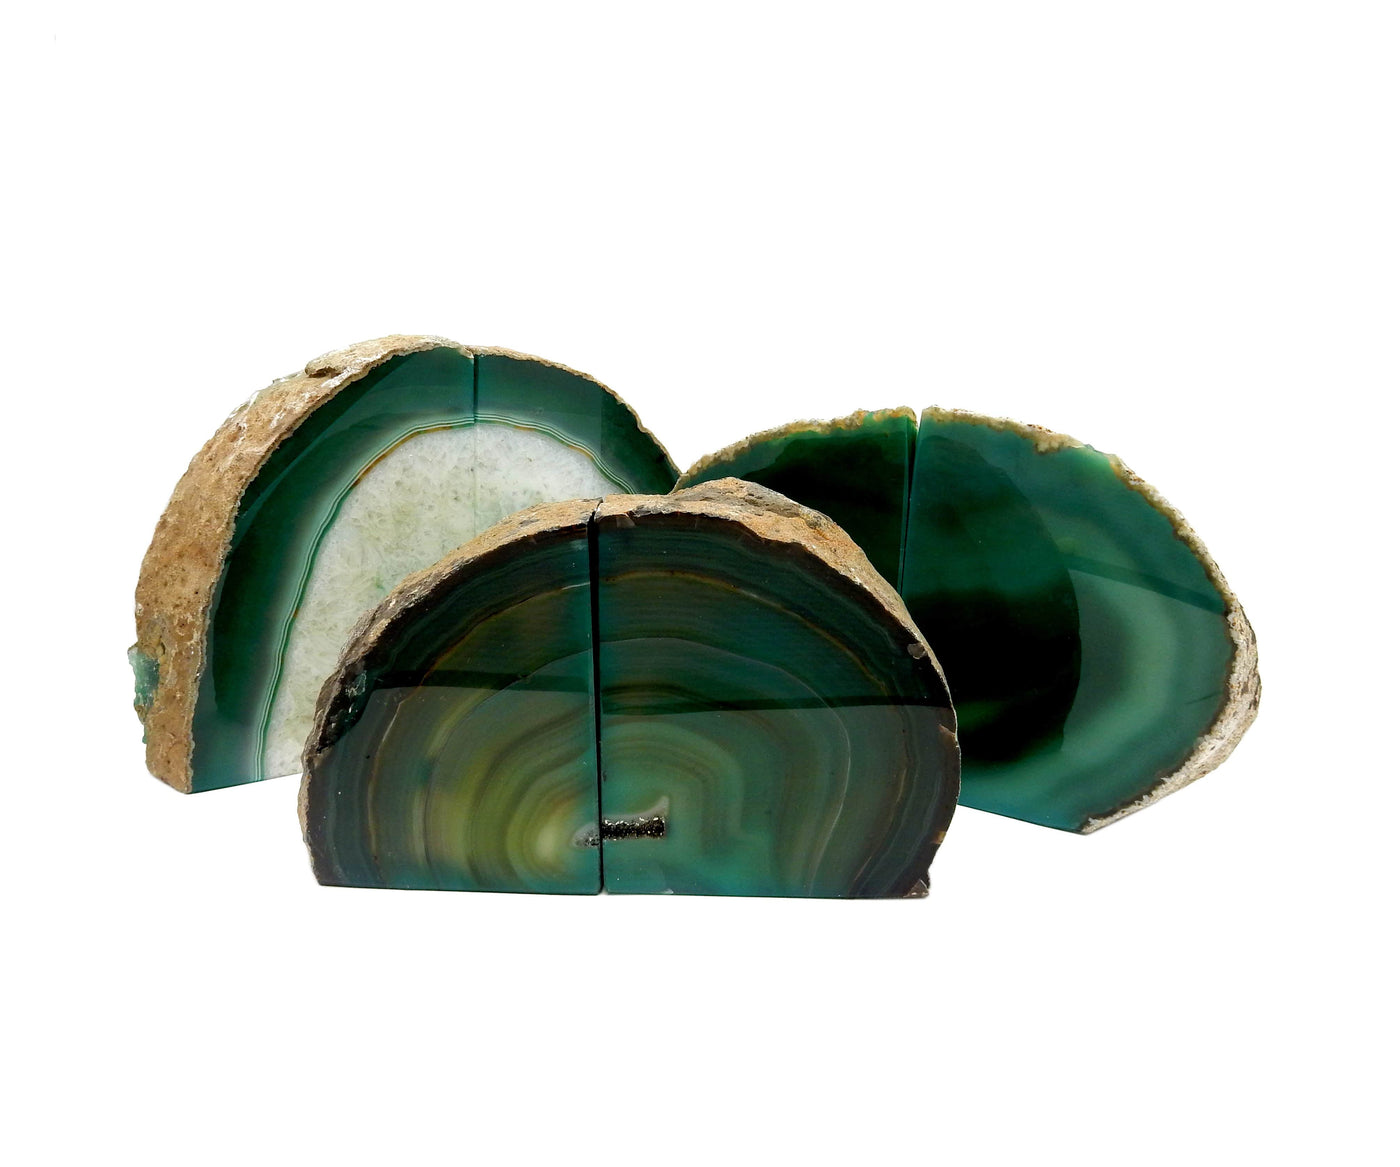 Three Green Agate Bookends displayed front facing to display the variation in pattern and size.